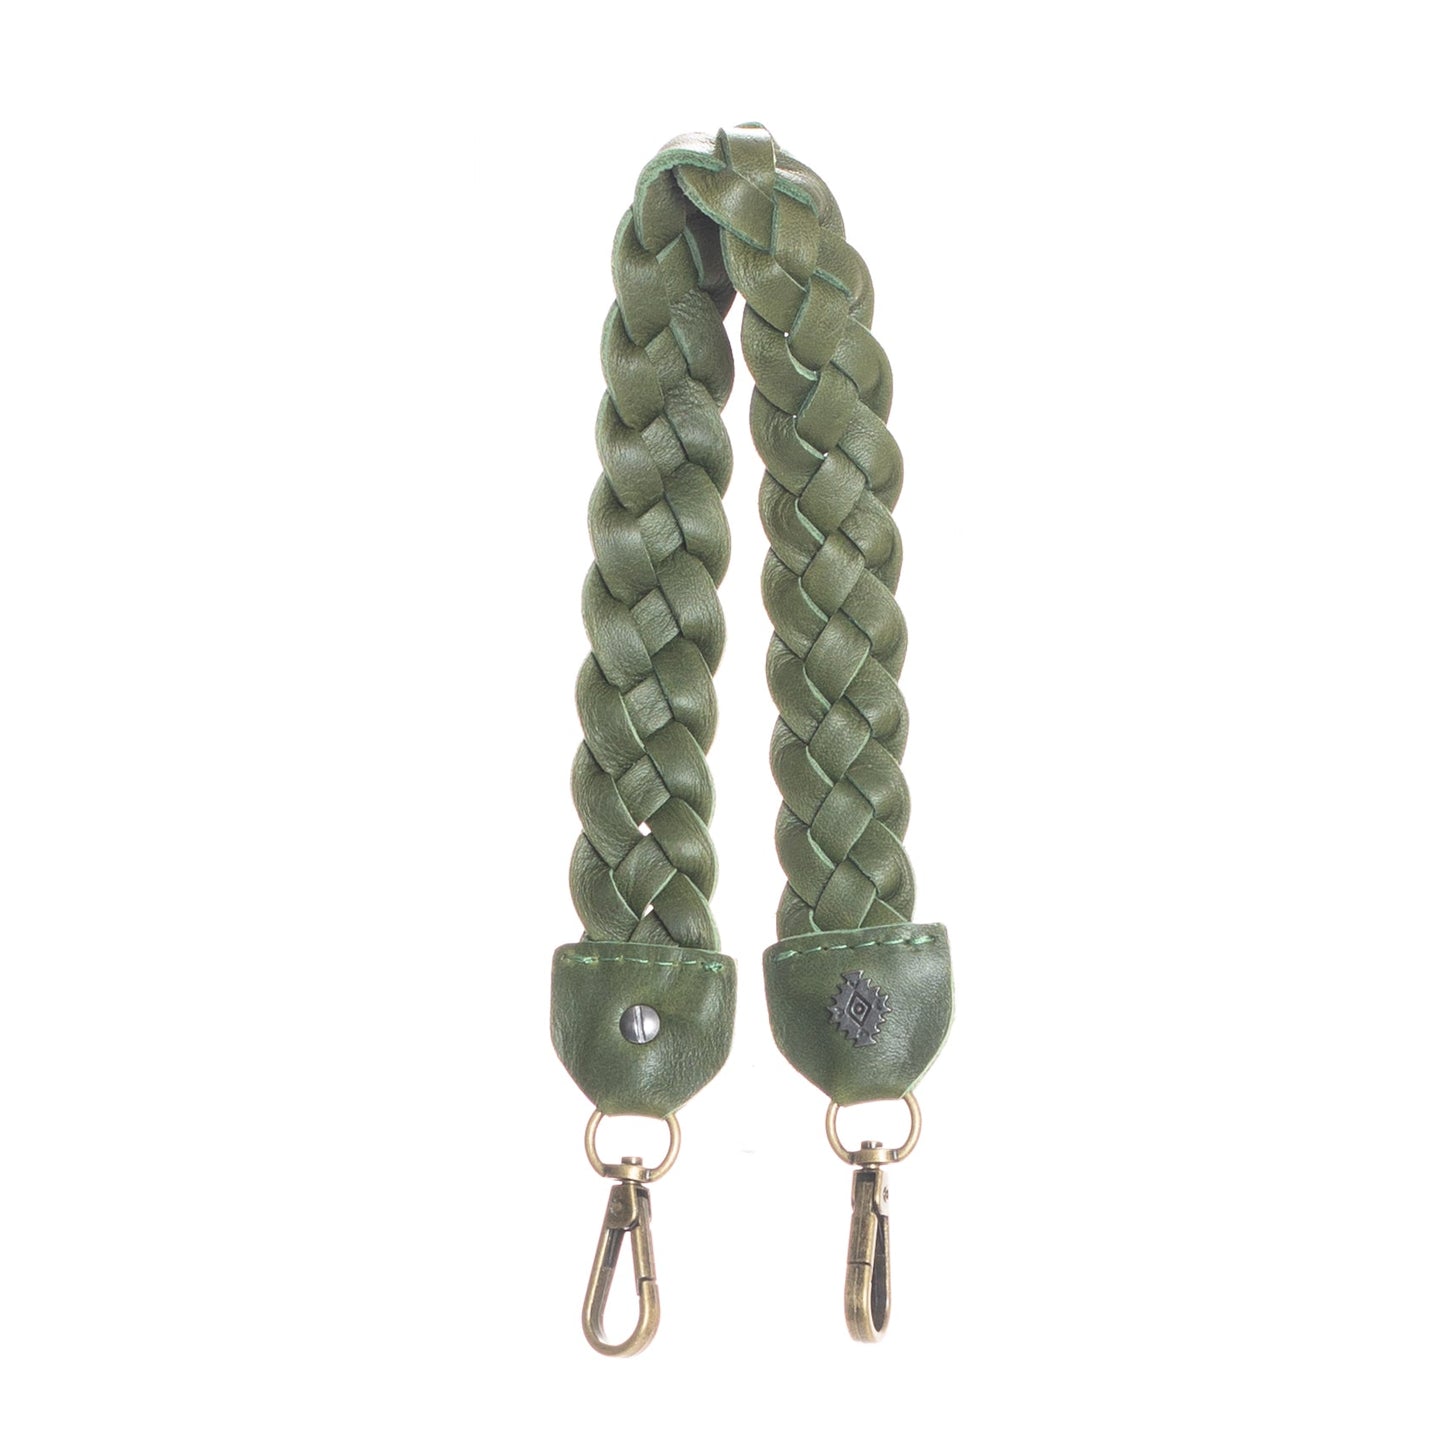 BRAIDED SHOULDER STRAP - ARTISAN COLLECTION - FULL LEATHER - DEEP EMERALD